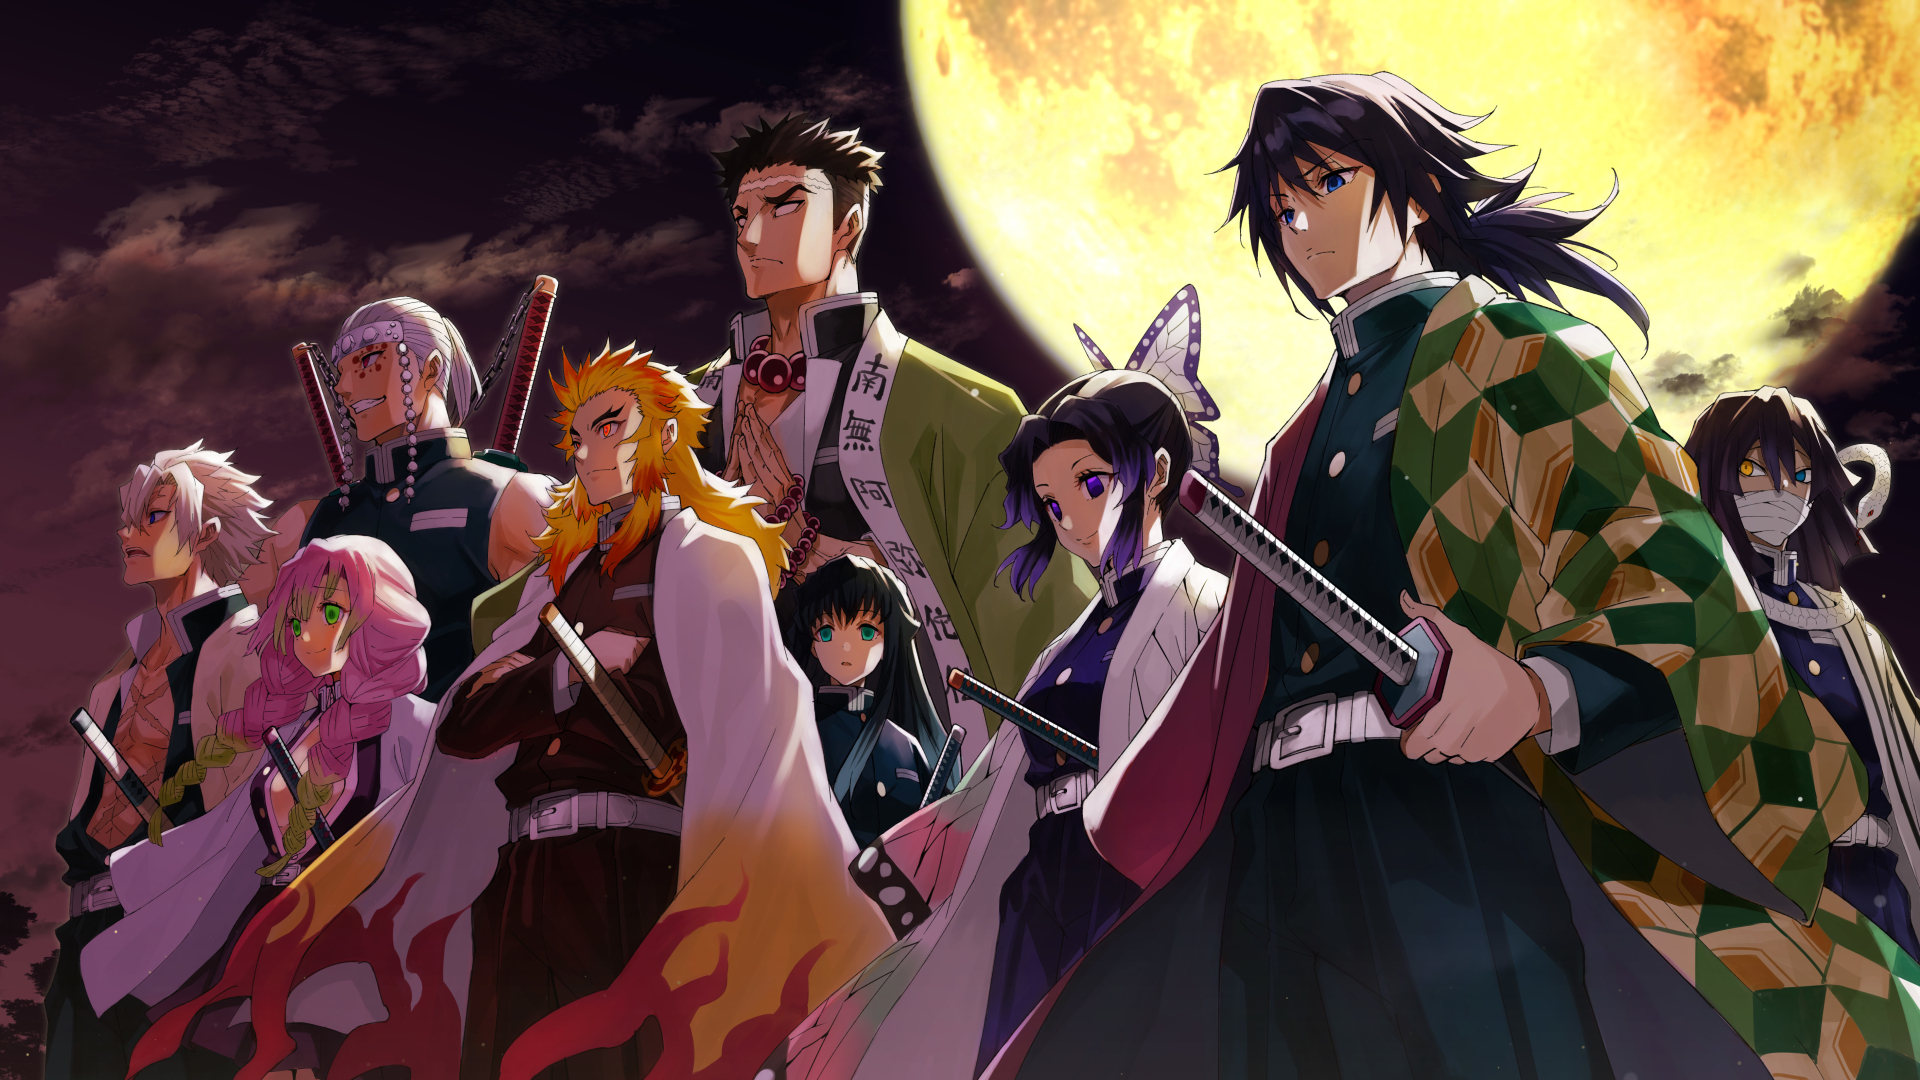 19x1080 Demon Slayer Kimetsu No Yaiba 4k Characters 1080p Laptop Full Hd Wallpaper Hd Anime 4k Wallpapers Images Photos And Background Wallpapers Den